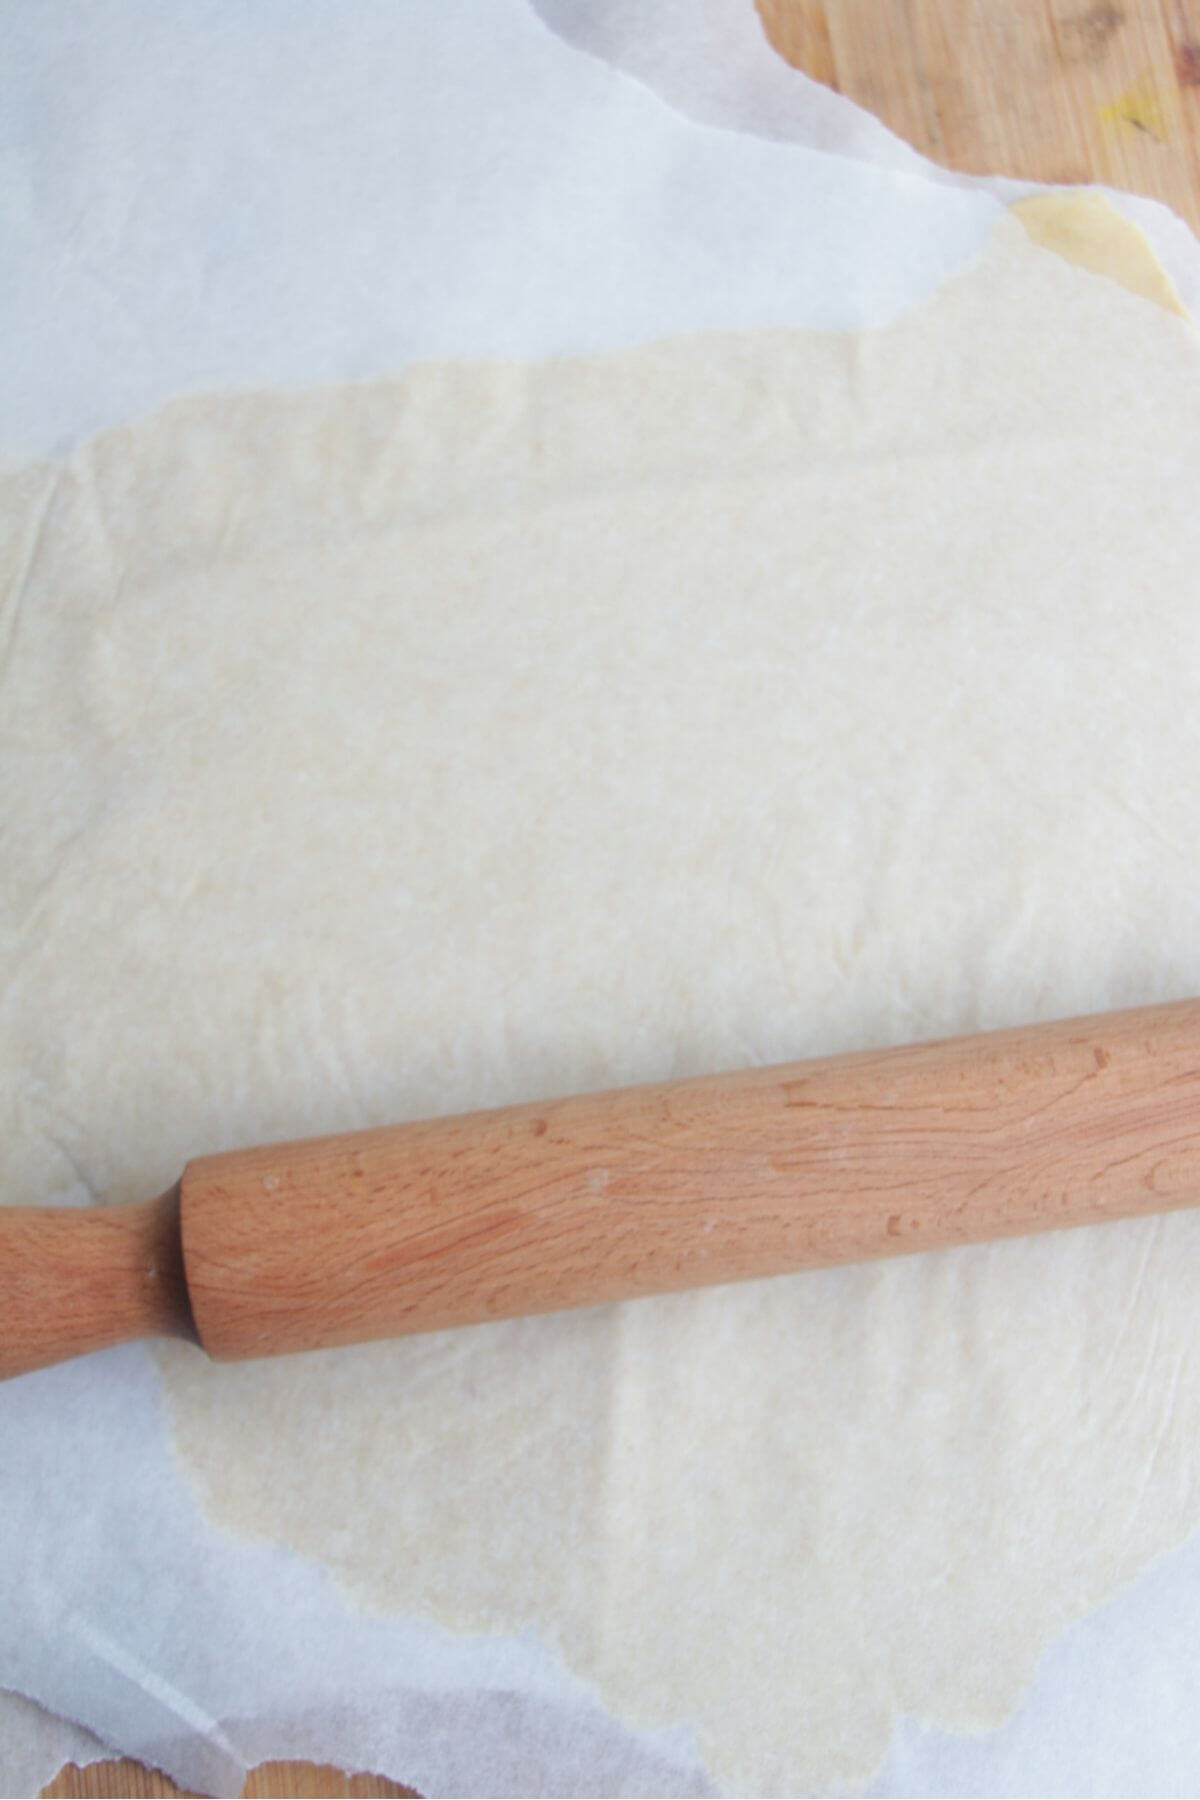 A rolling pin on a sheet of baking paper with rolled out pastry underneath.